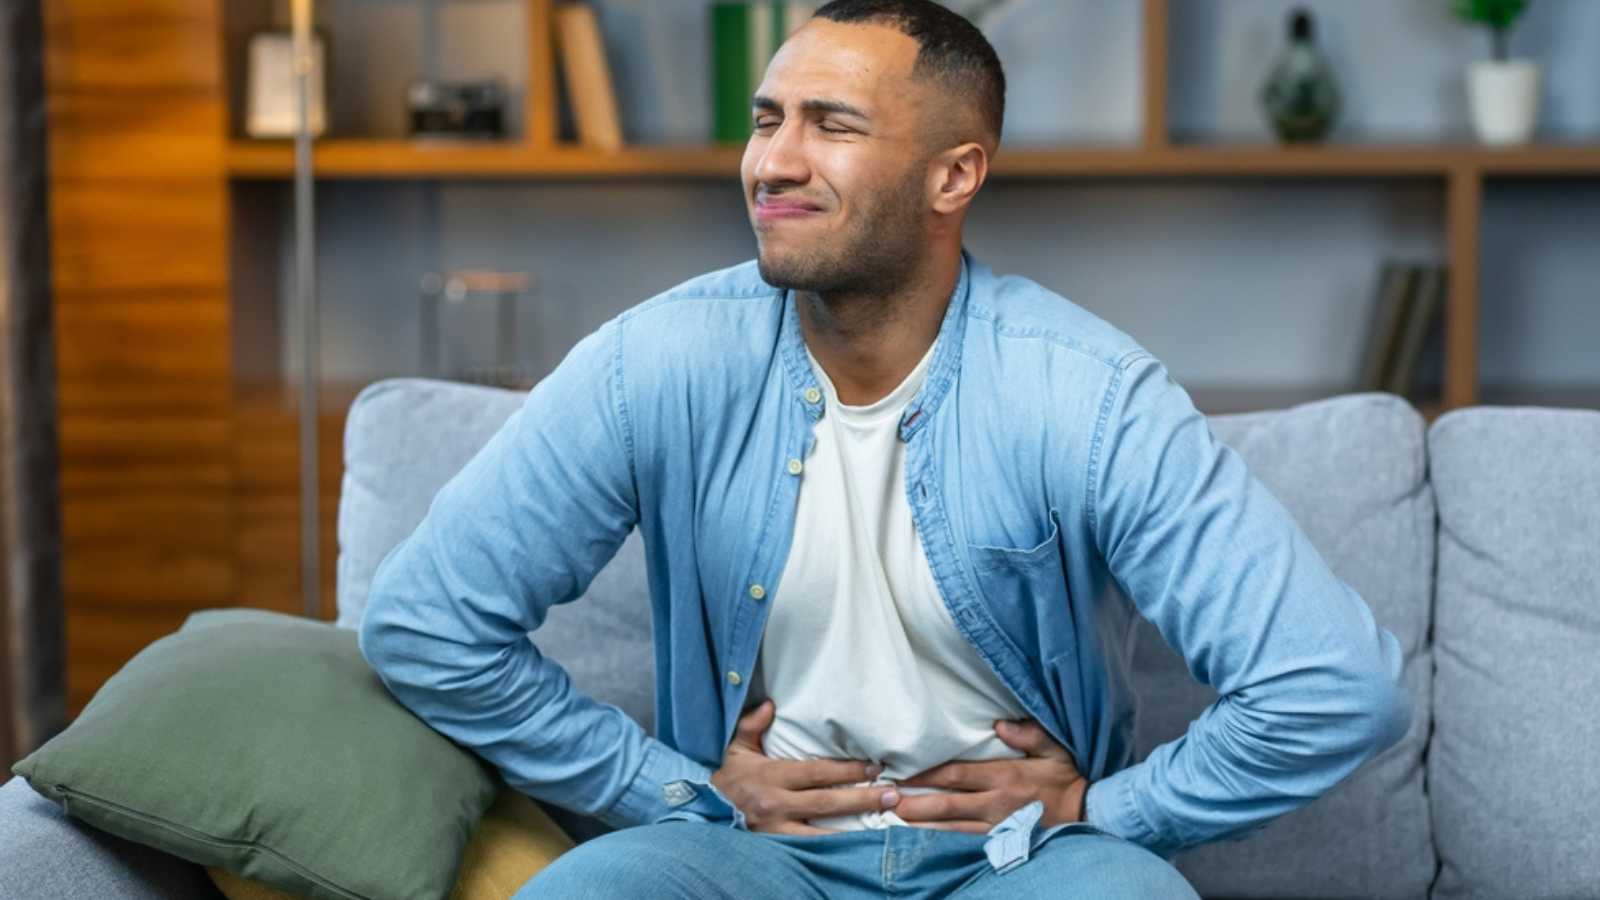 Man Having Stomach Pain After Eating Too Much